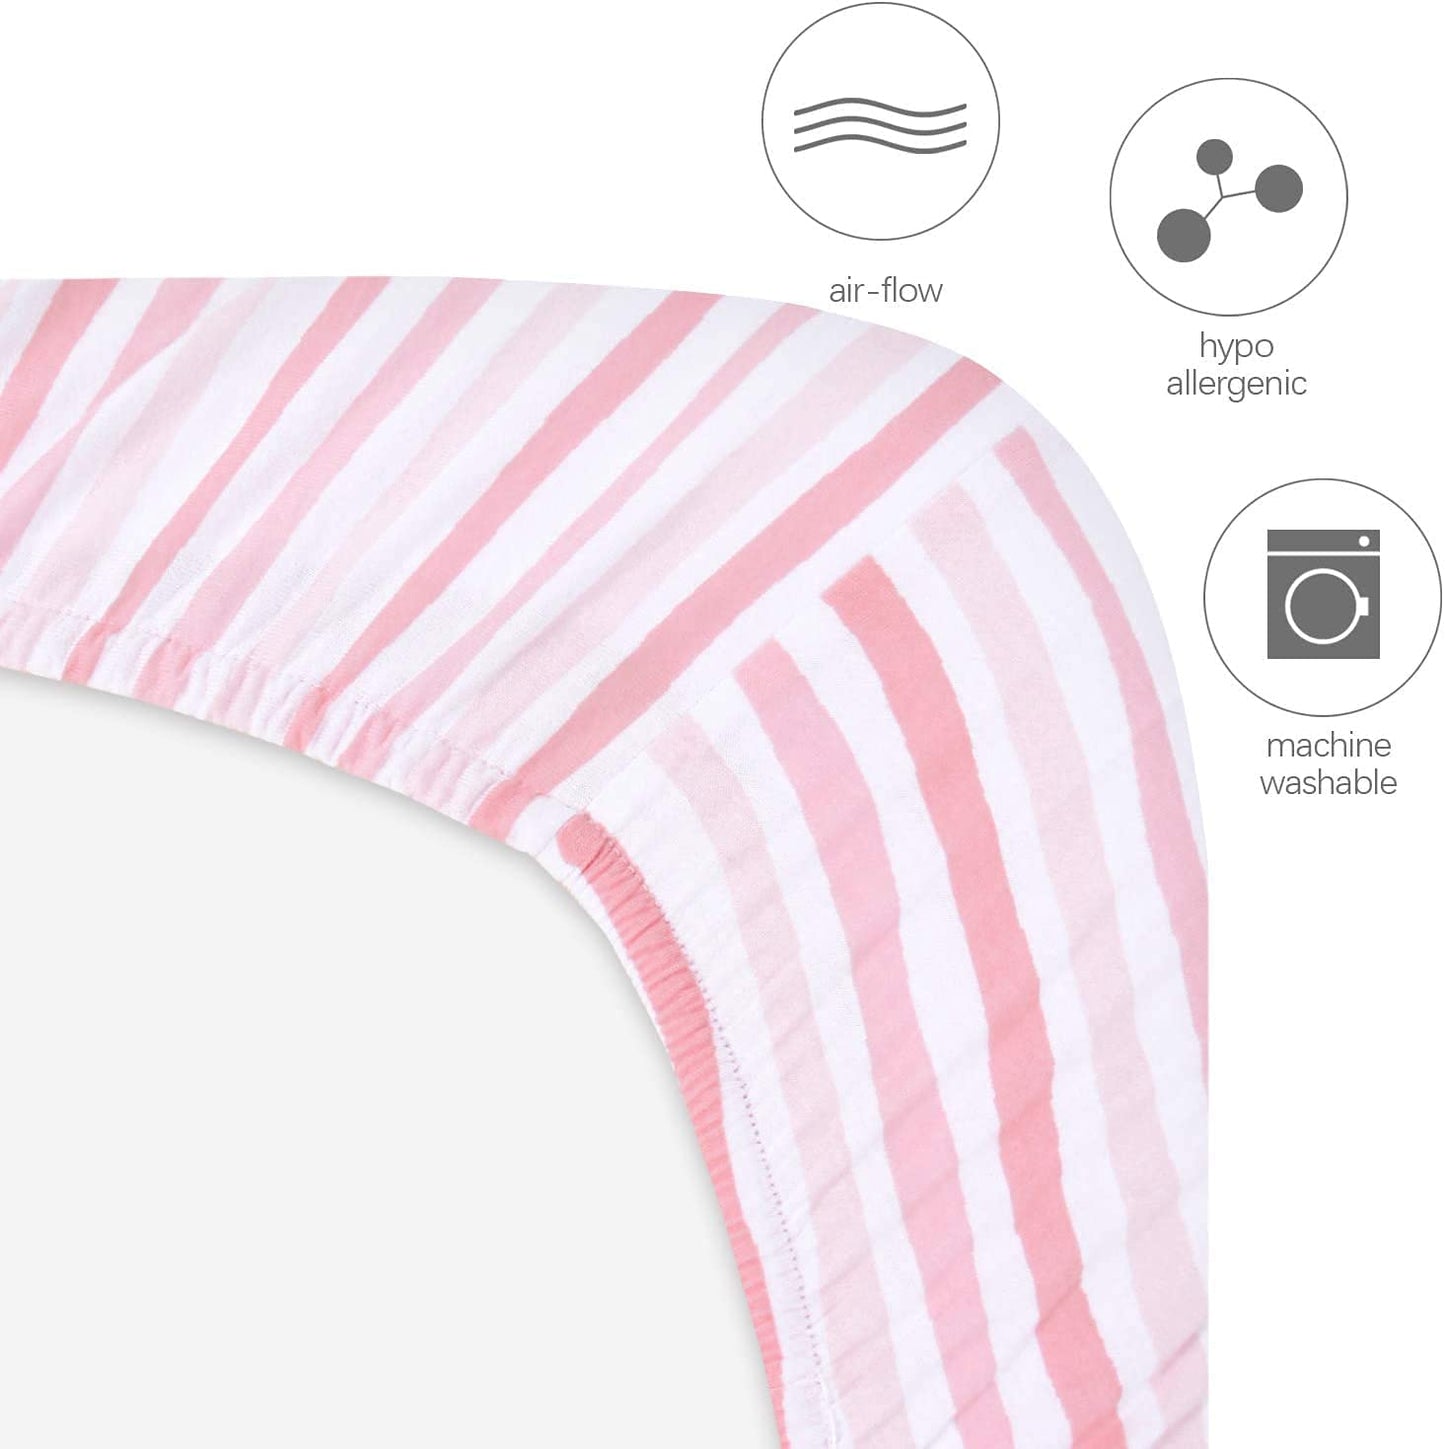 Bassinet Sheets - Fit Fisher-Price Luminate Bassinet, 2 Pack, 100% Jersey Cotton